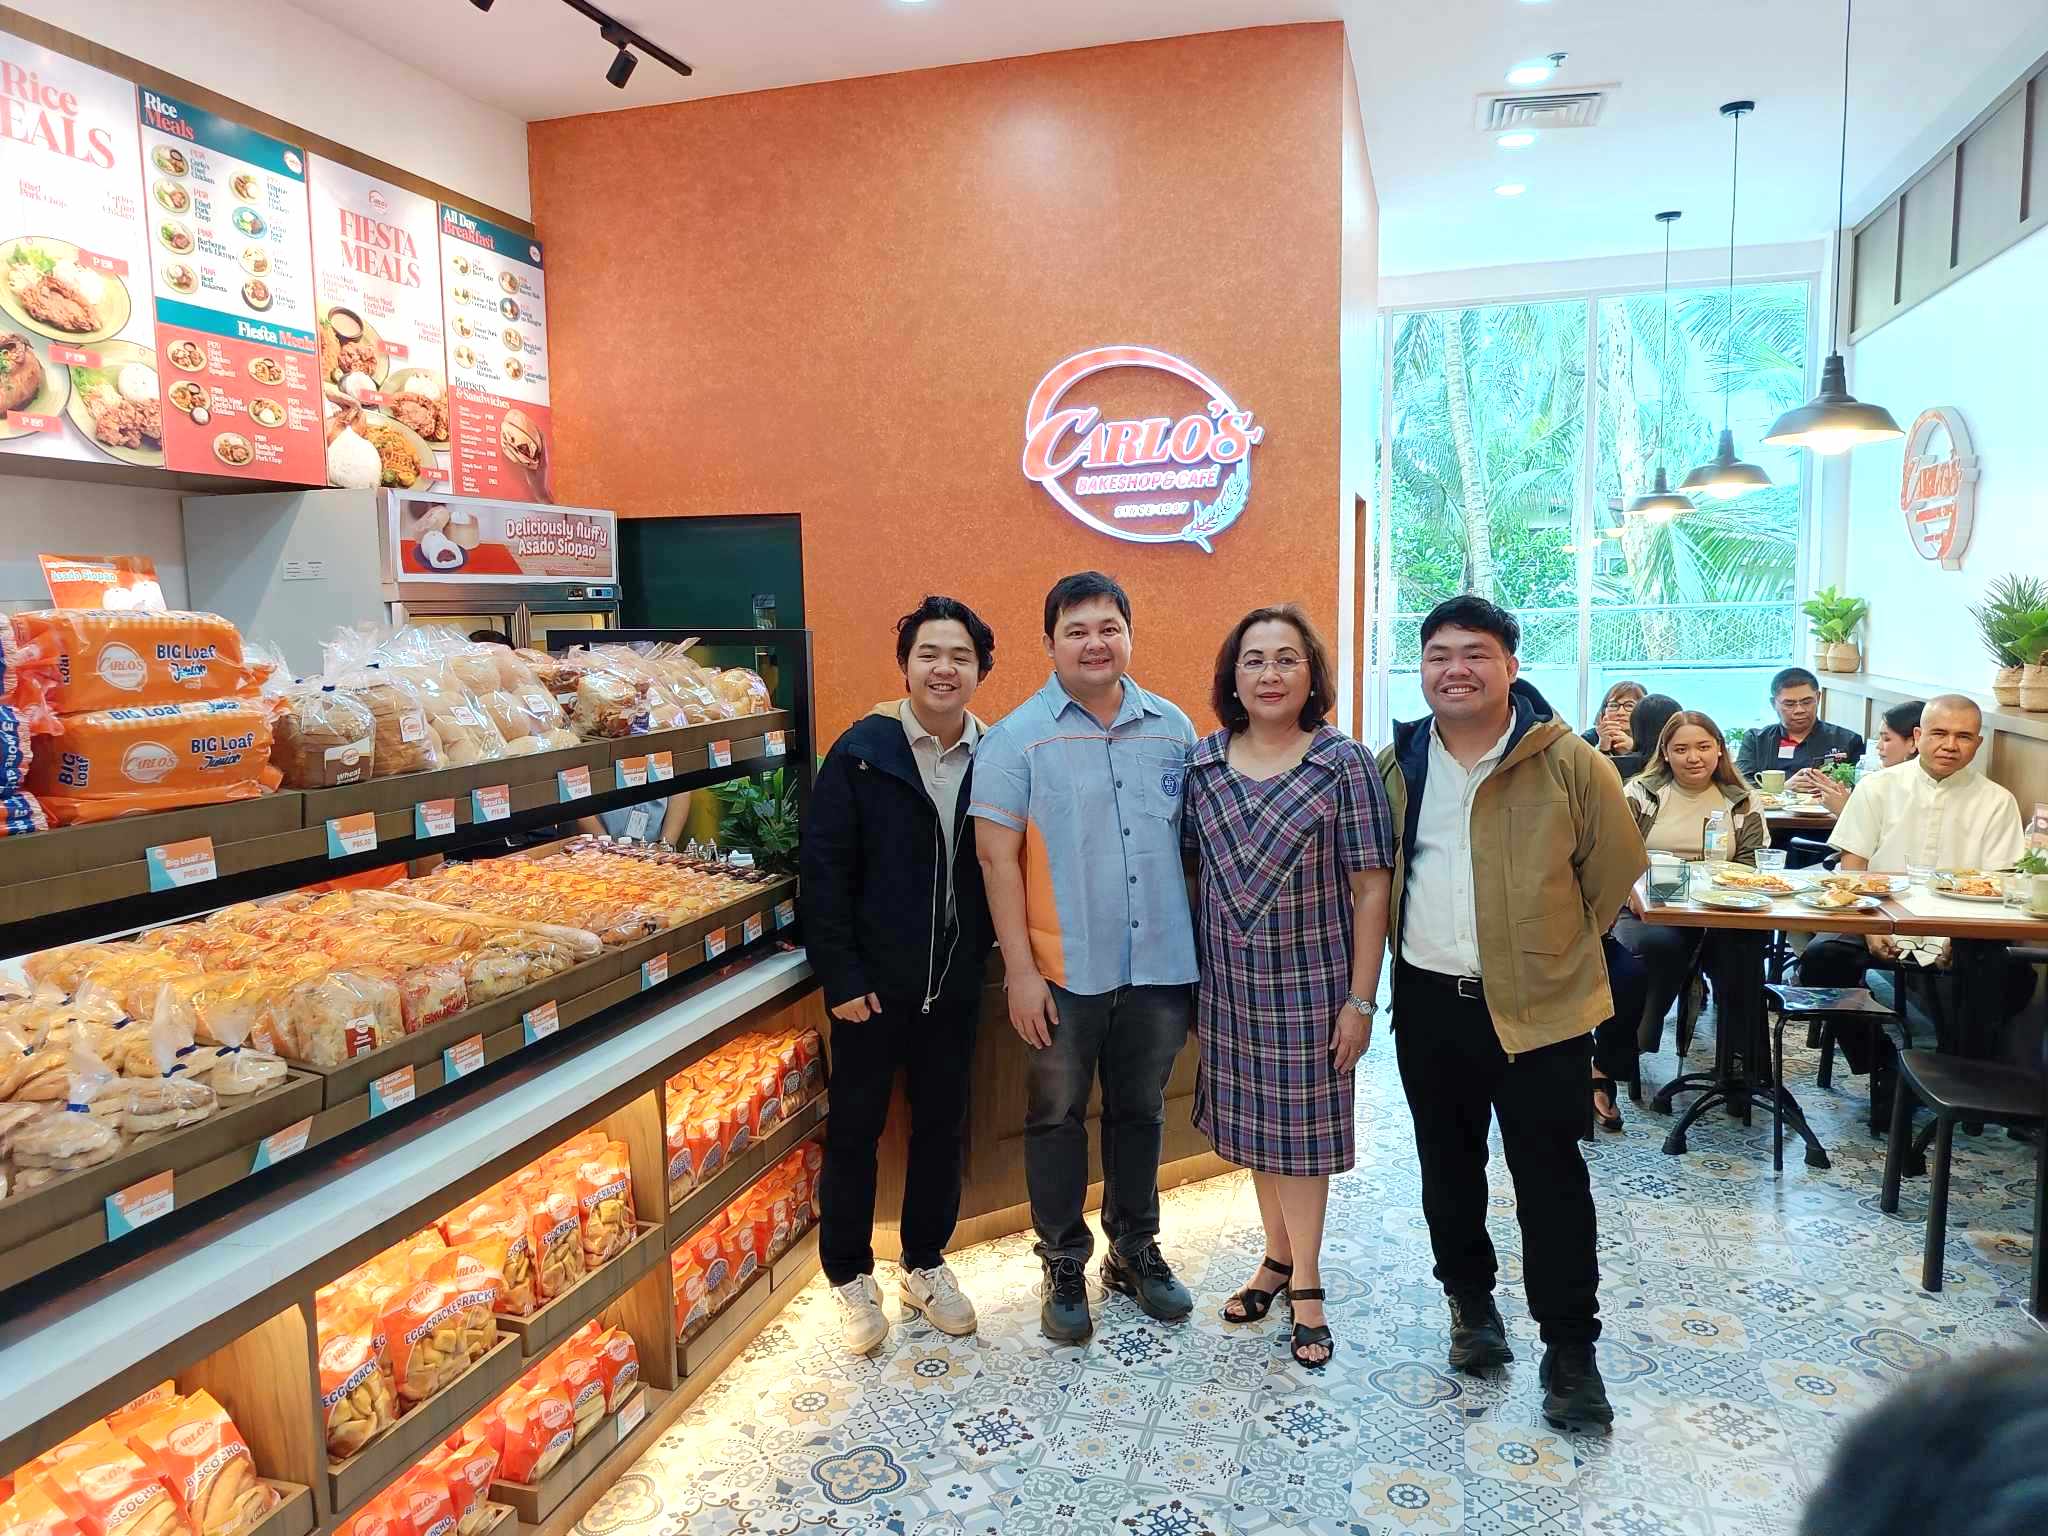 Carlo's Bakeshop family at revamped SM Hypermarket branch: (L to R) Sirs Gerry, Carlo, Ma'am Rosalie, and Sir Paolo.